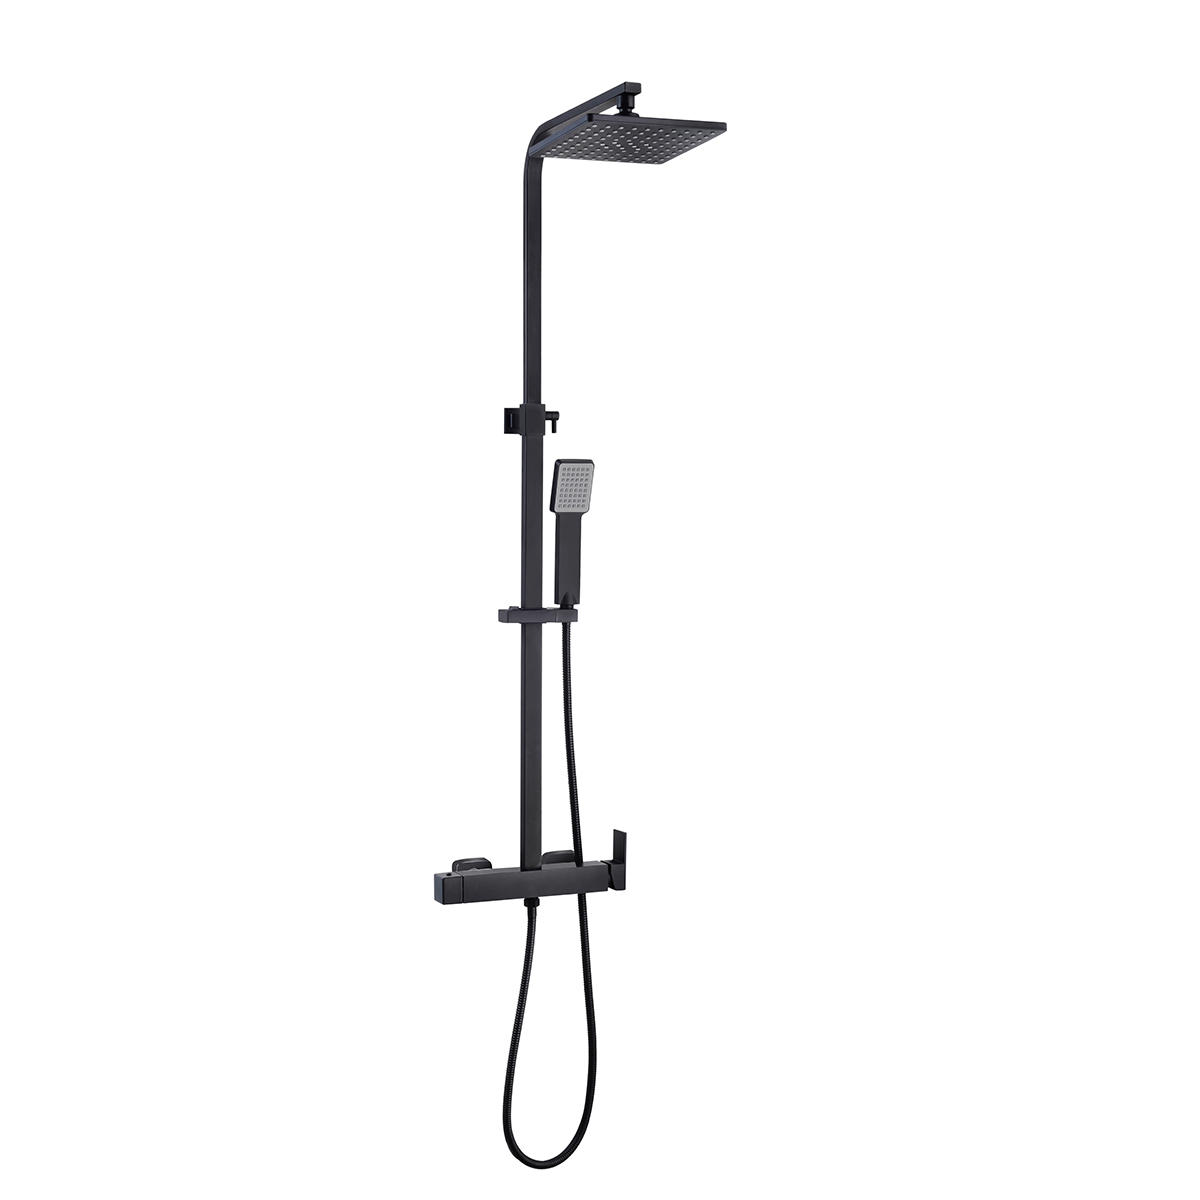 YS34185B	Square shower column, rain shower column with shower faucet, height adjustable;